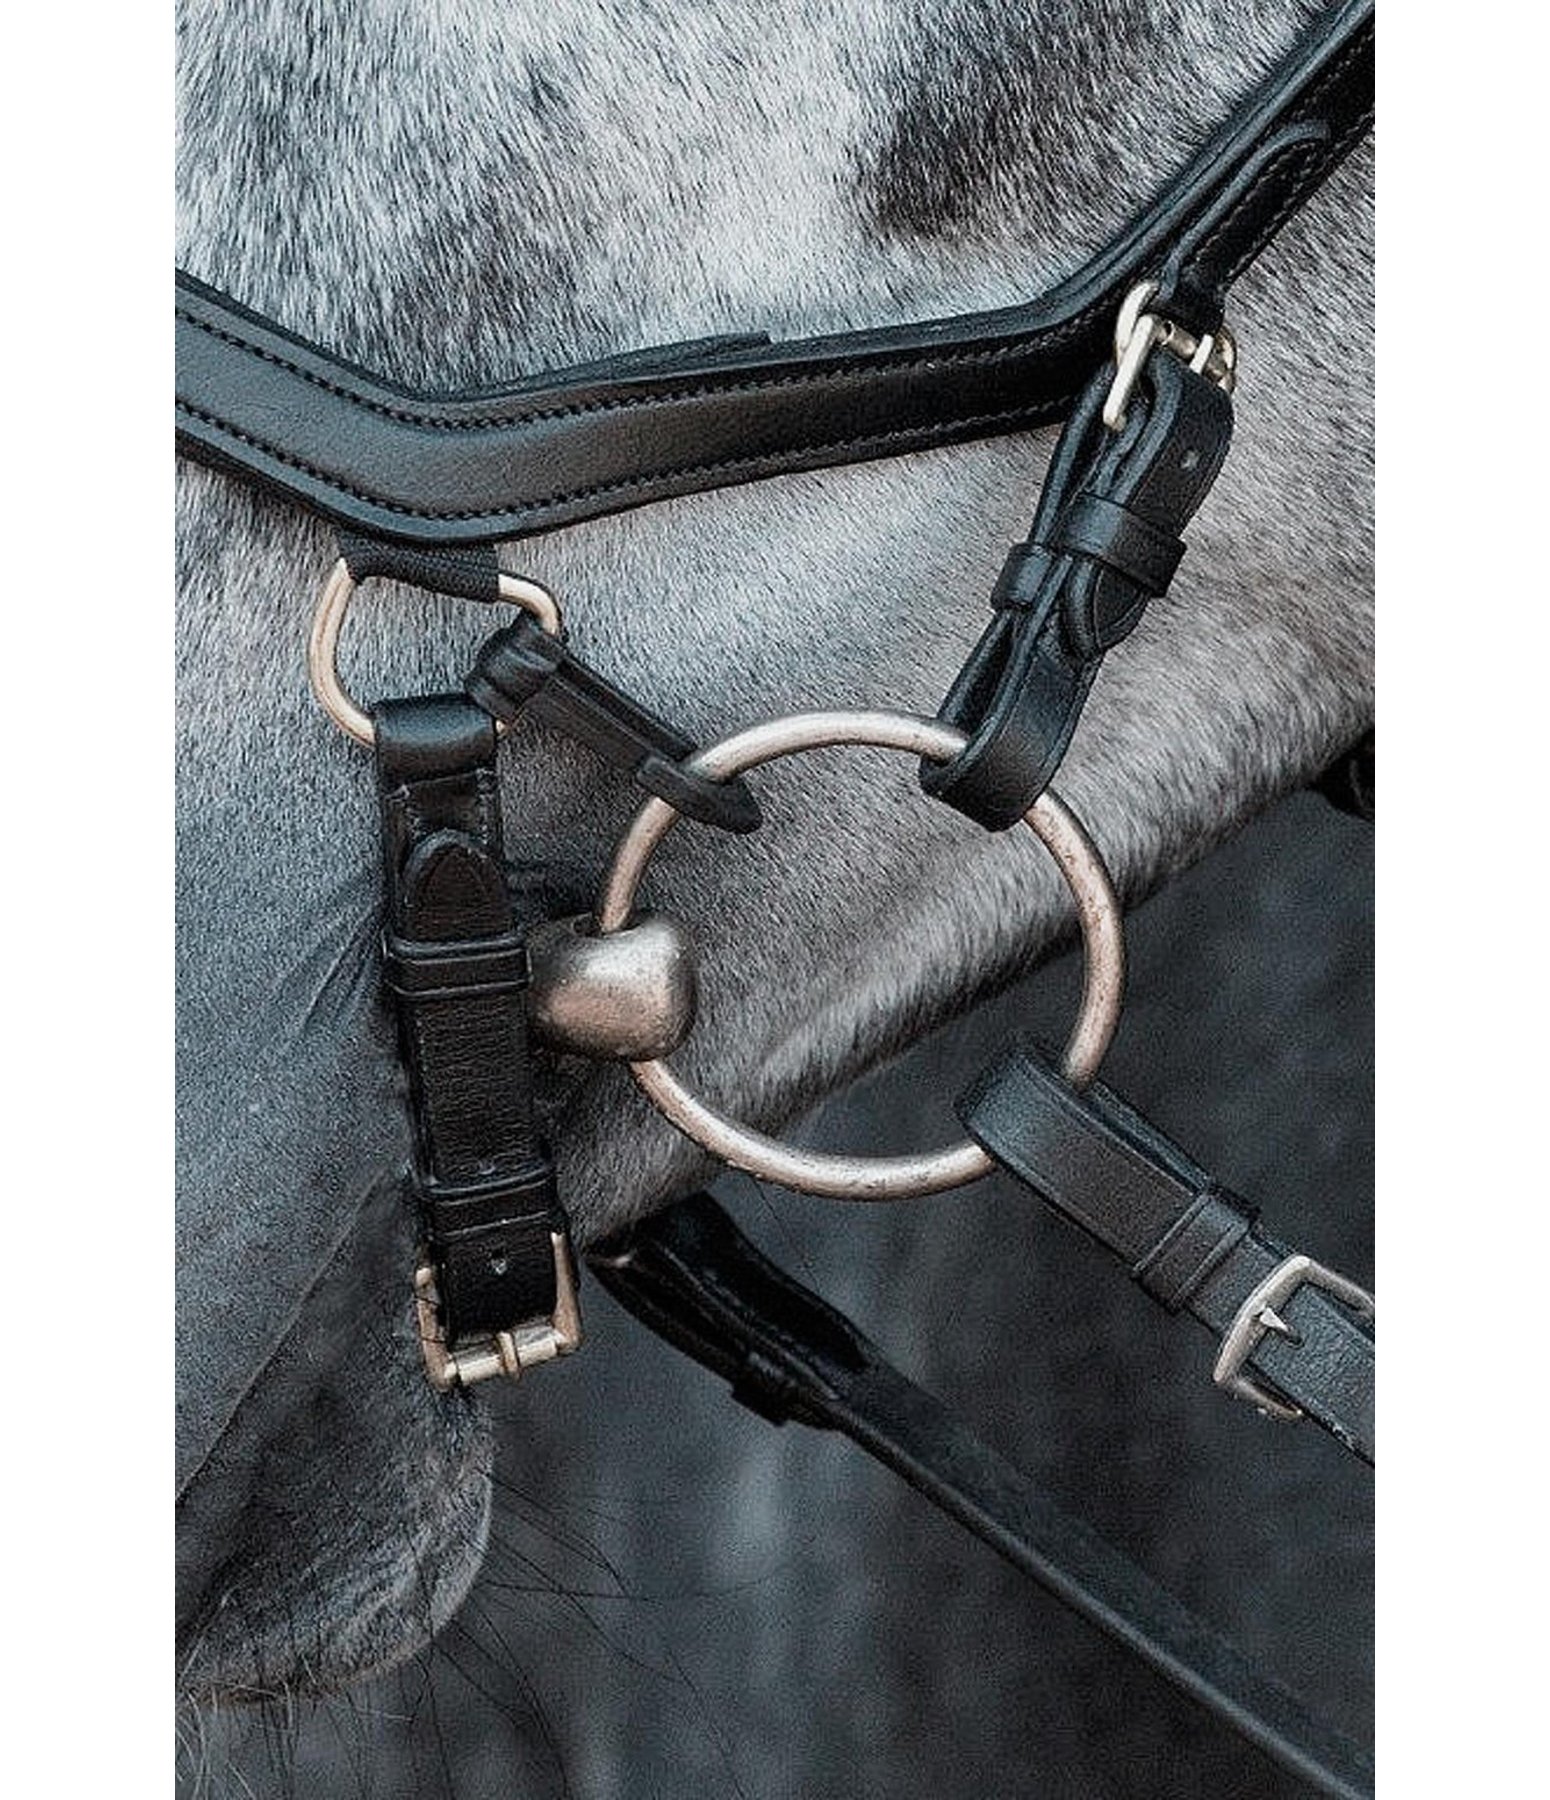 RAMBO Micklem Competition Bridle - Drop Nosebands & Spanish Bridles ...